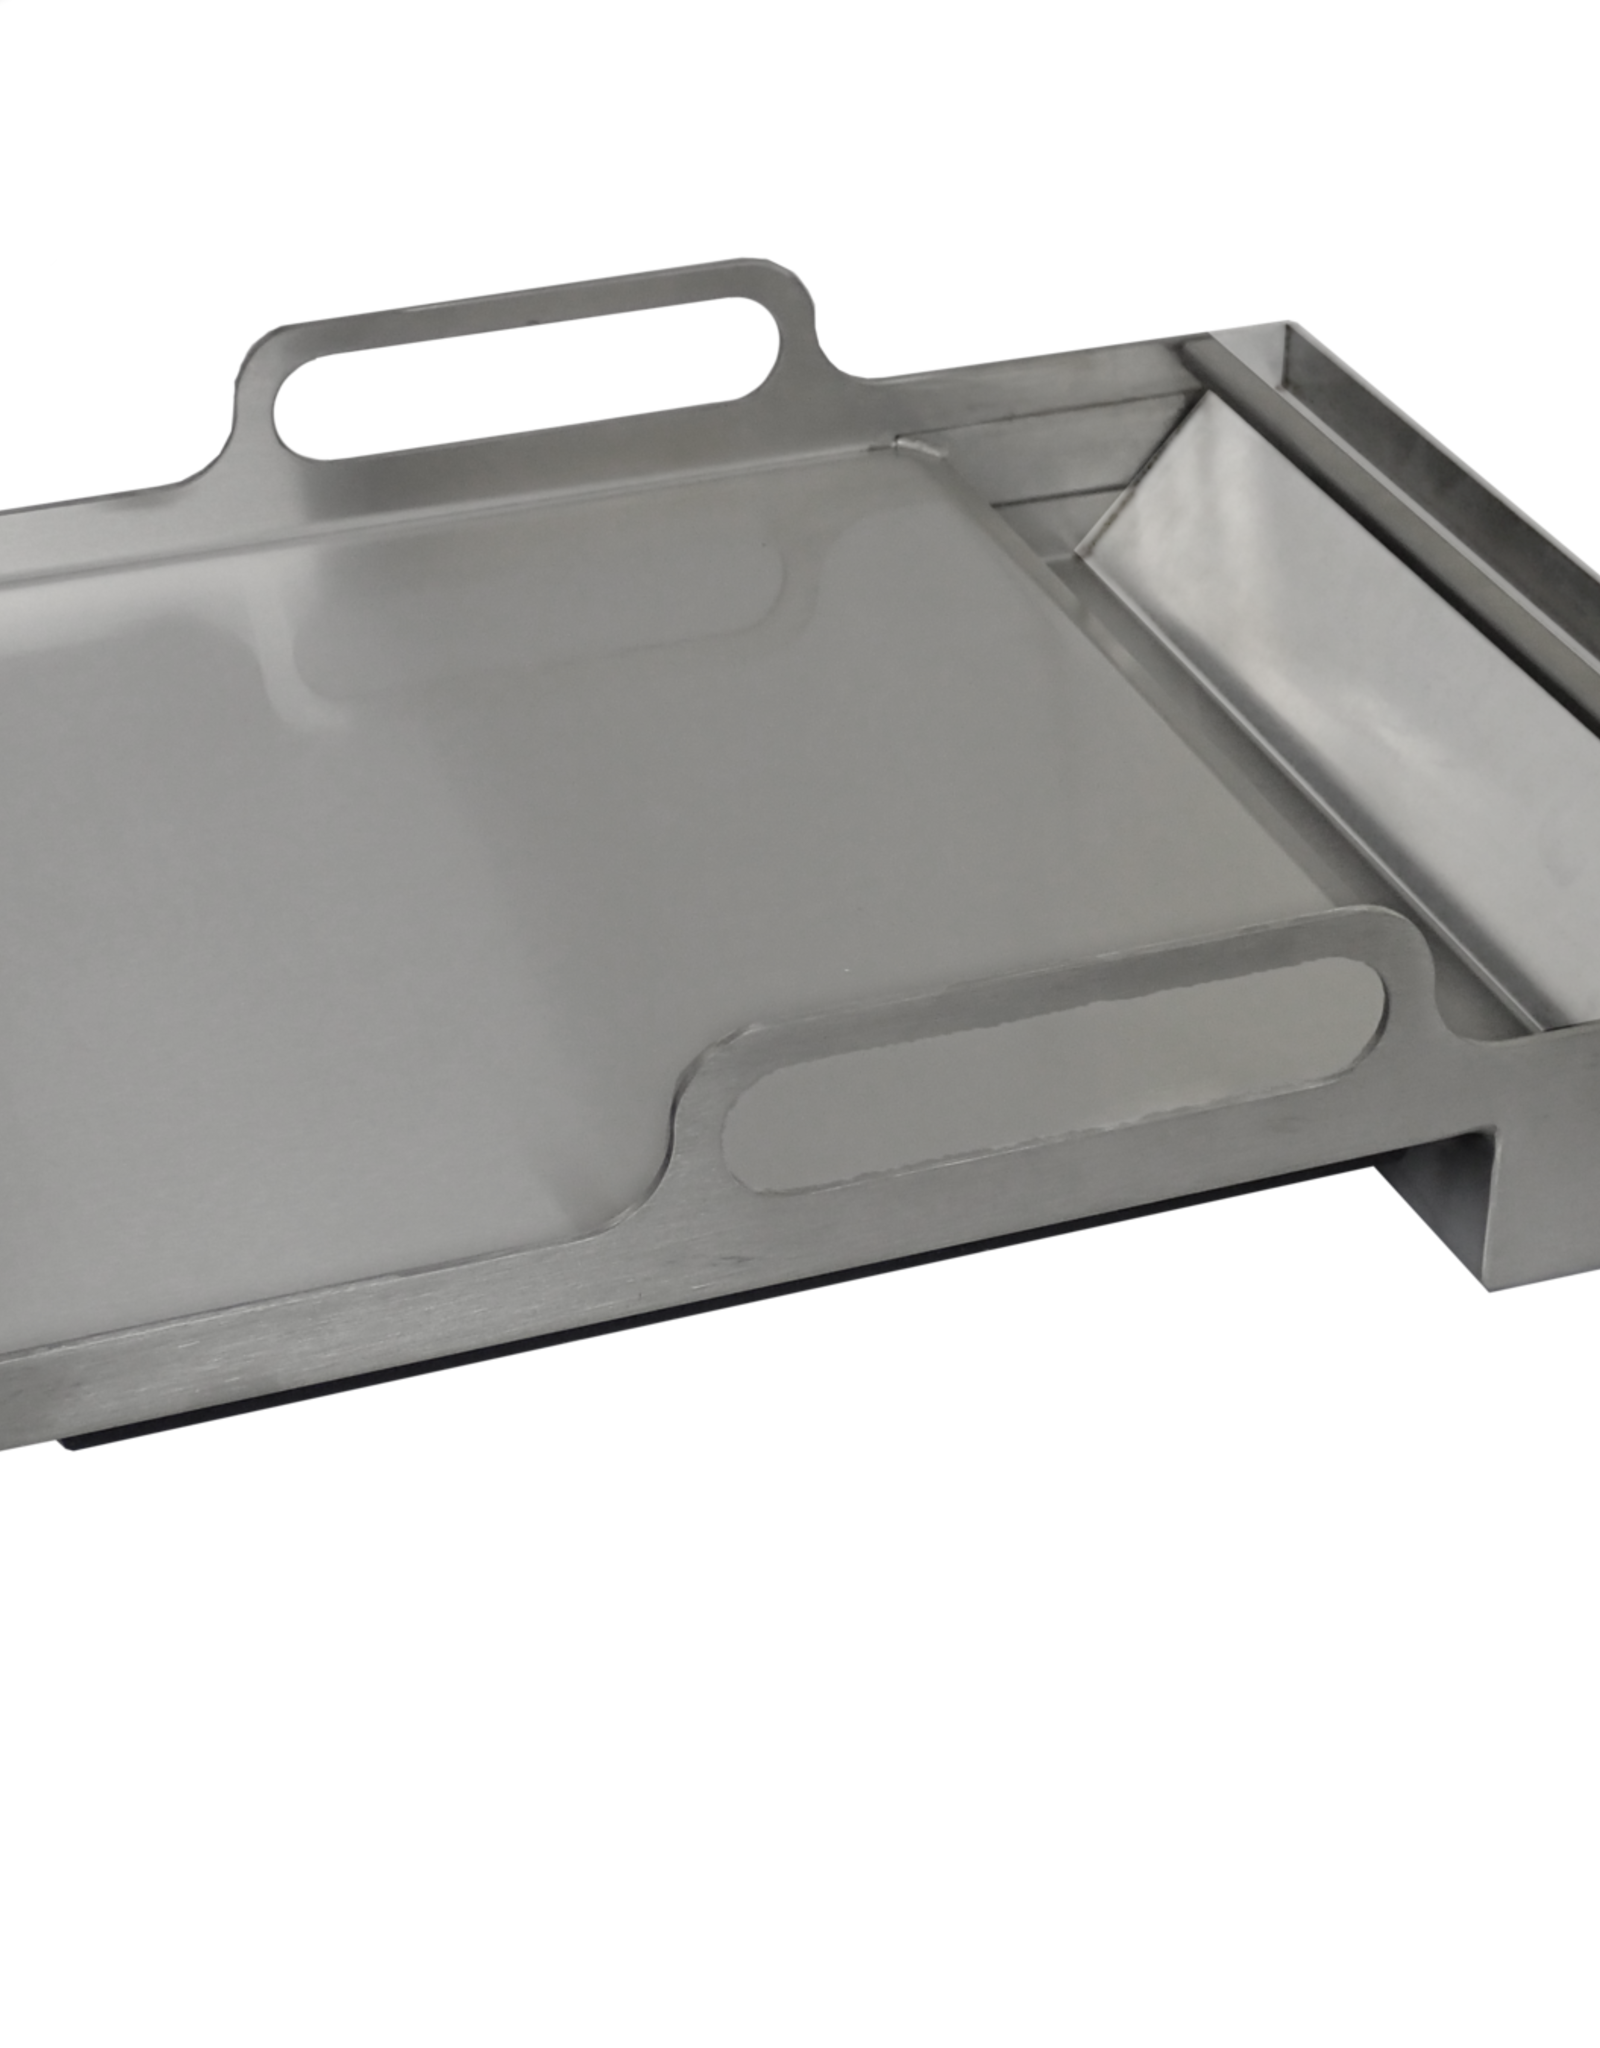 Renaissance Cooking Systems Renaissance Cooking Systems Dual Plate Stainless Steel Griddle - RSSG3